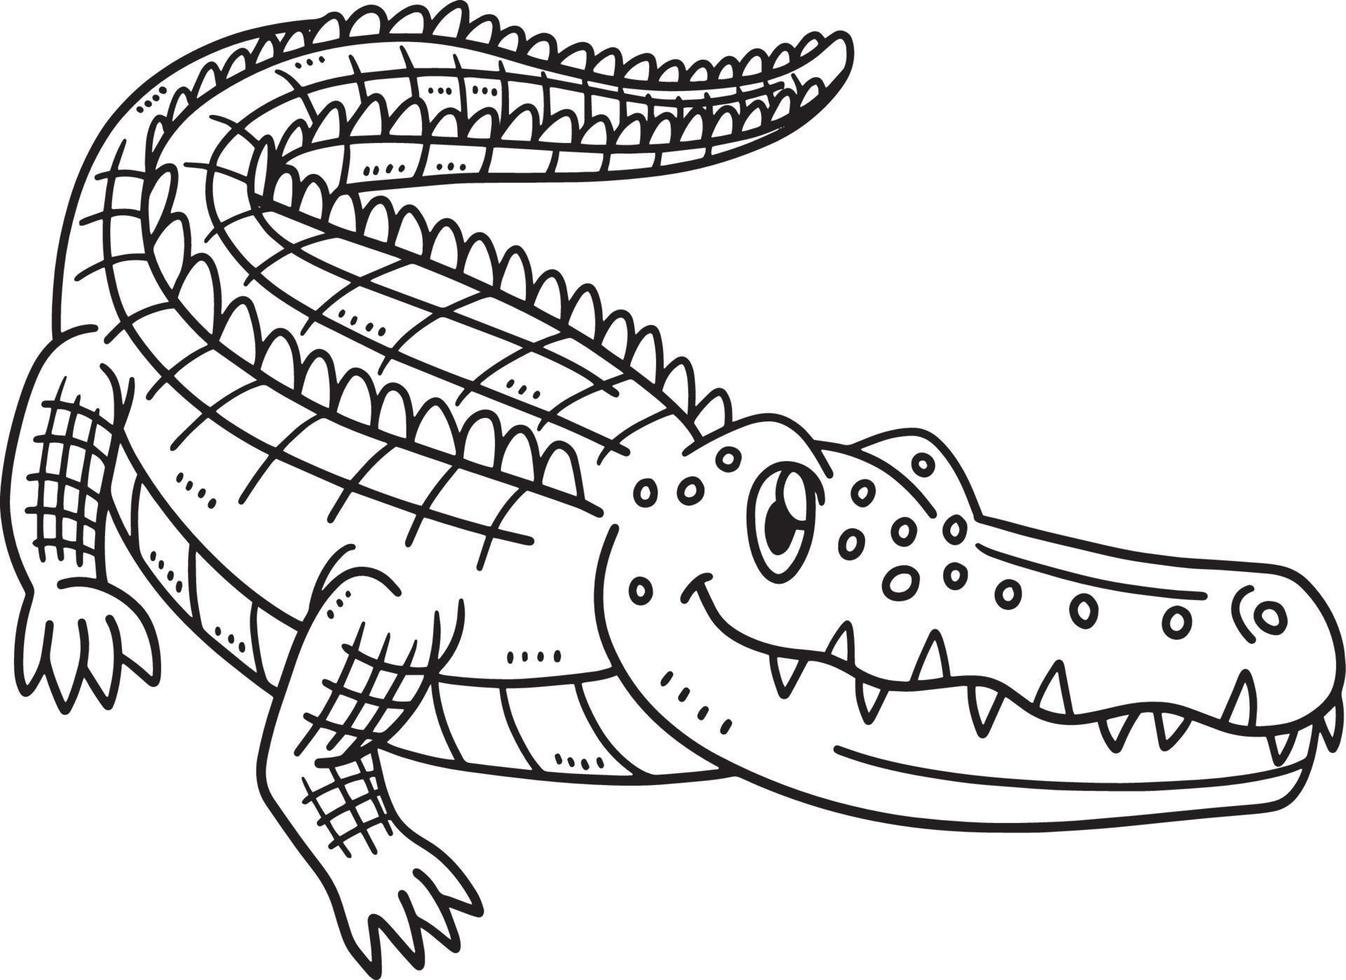 Mother Crocodile Isolated Coloring Page for Kids vector